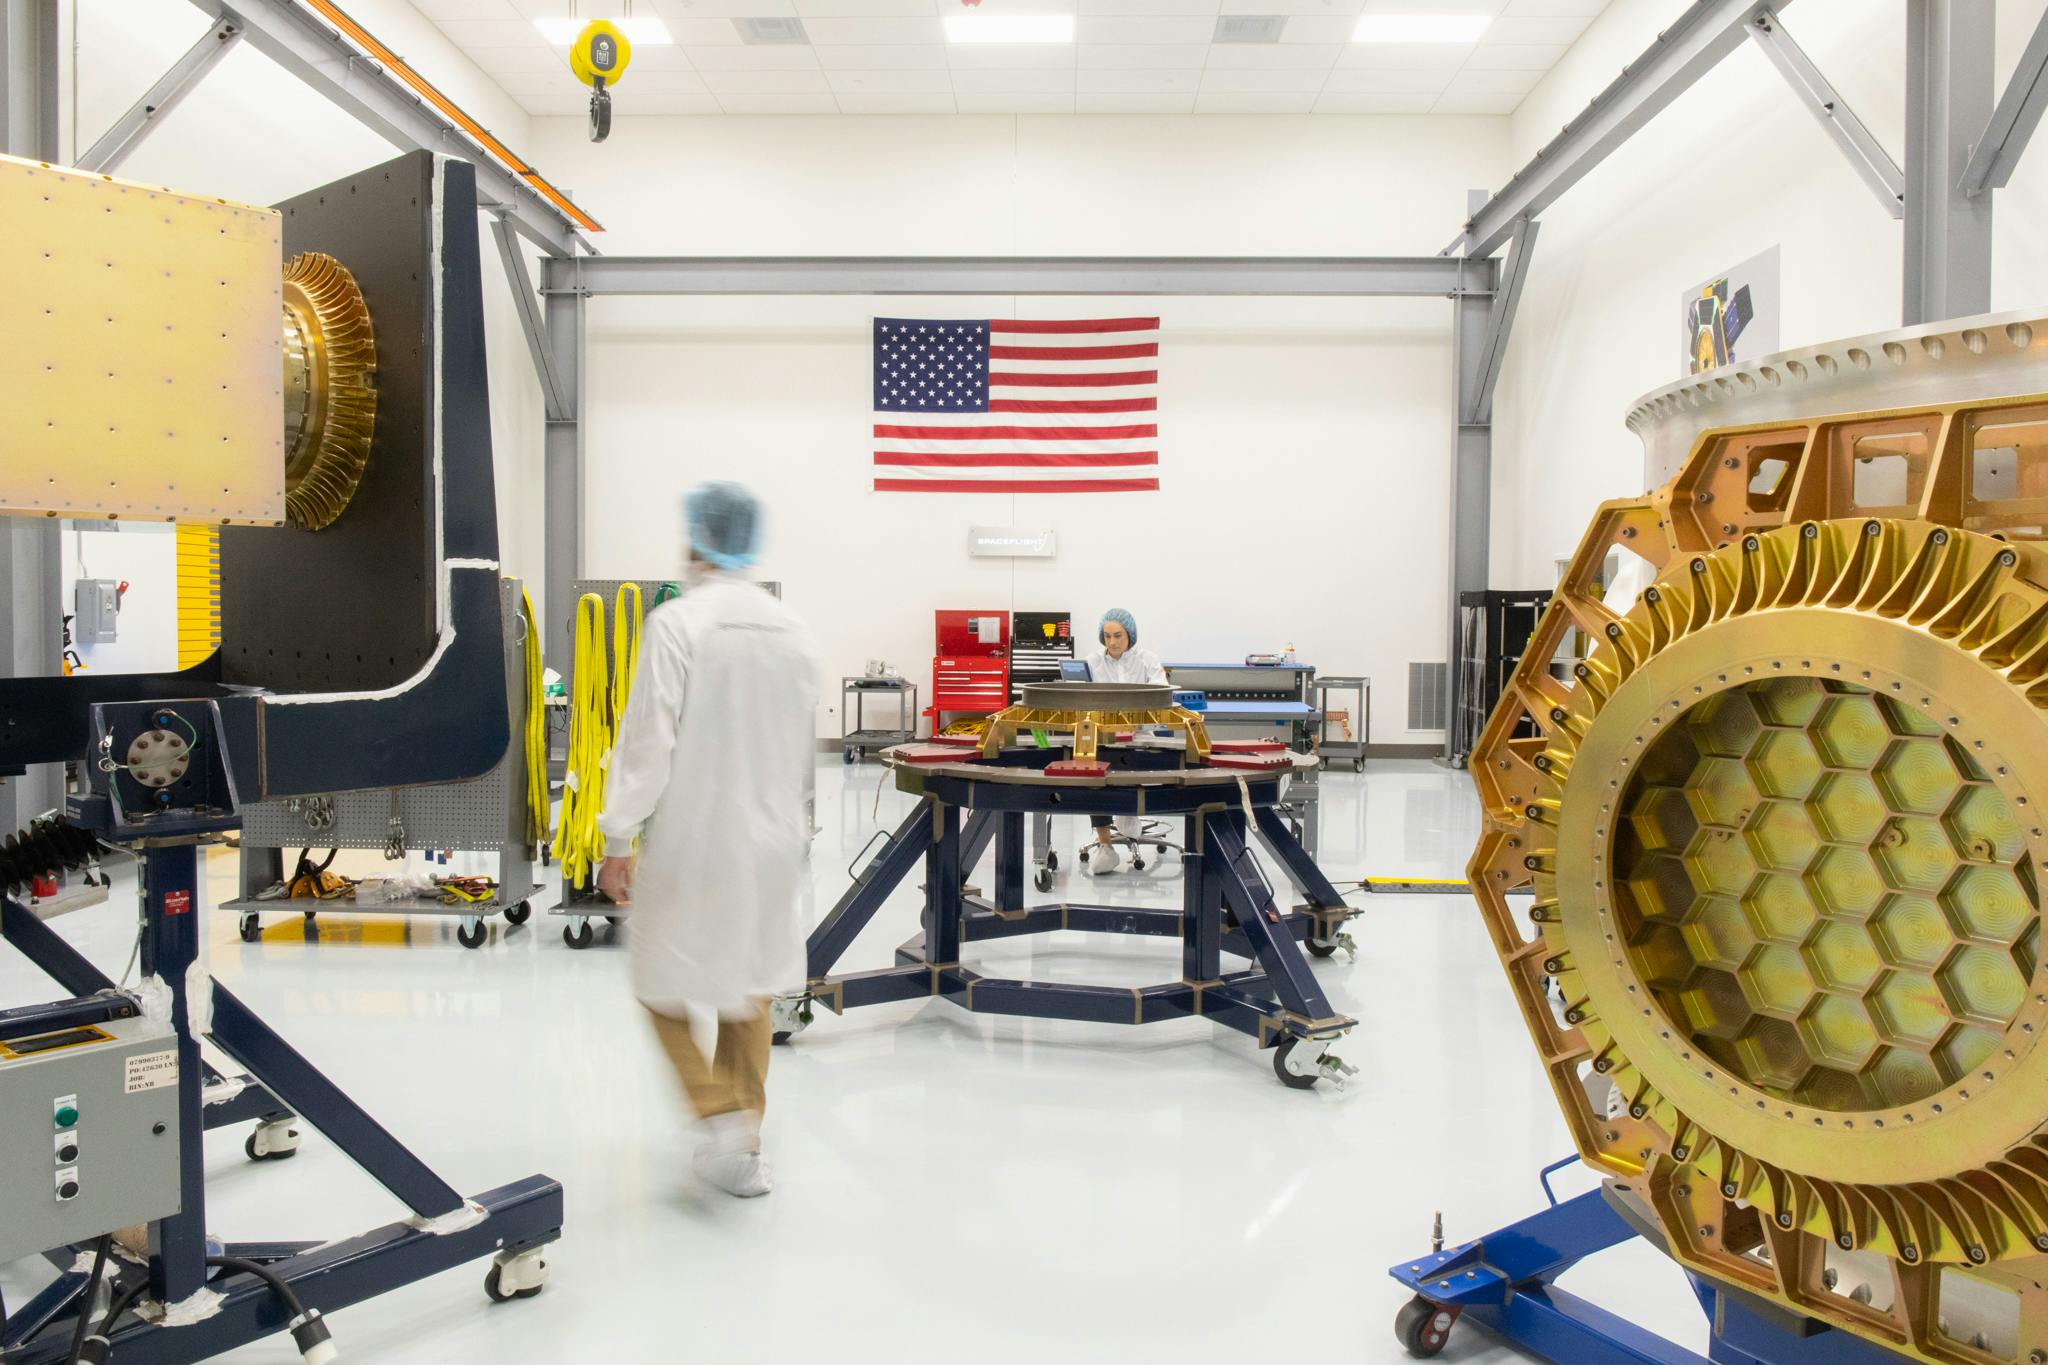 Inside Spaceflight's cleanroom. A large piece of equipment is in the foreground, while two people in lab coats work in the background.